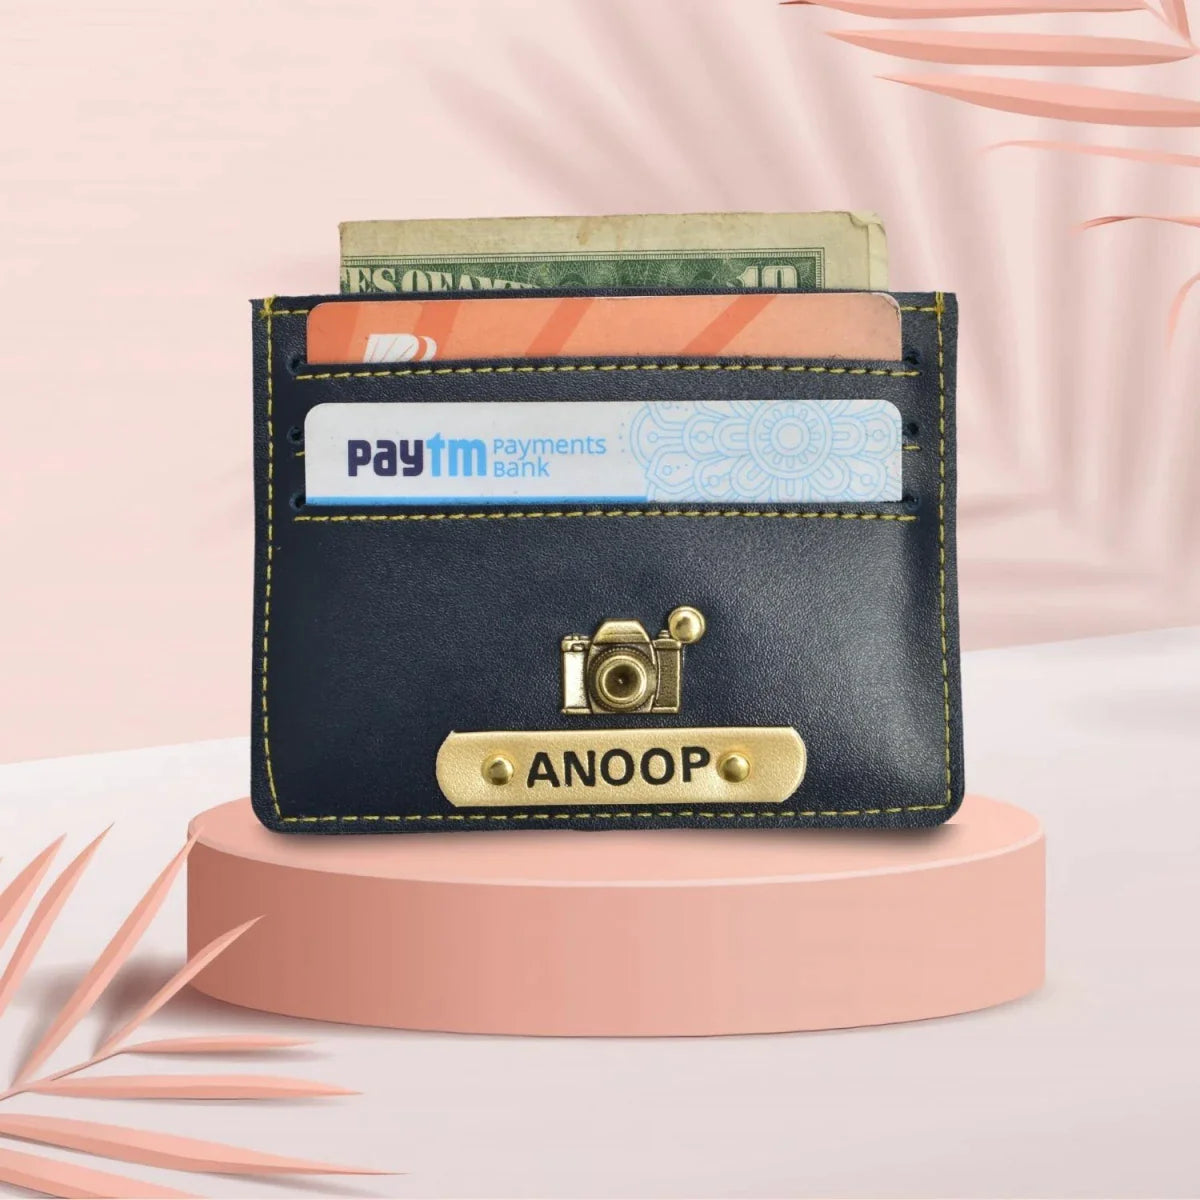 Keep your cards organized and secure with our personalized vegan leather unisex card wallet.